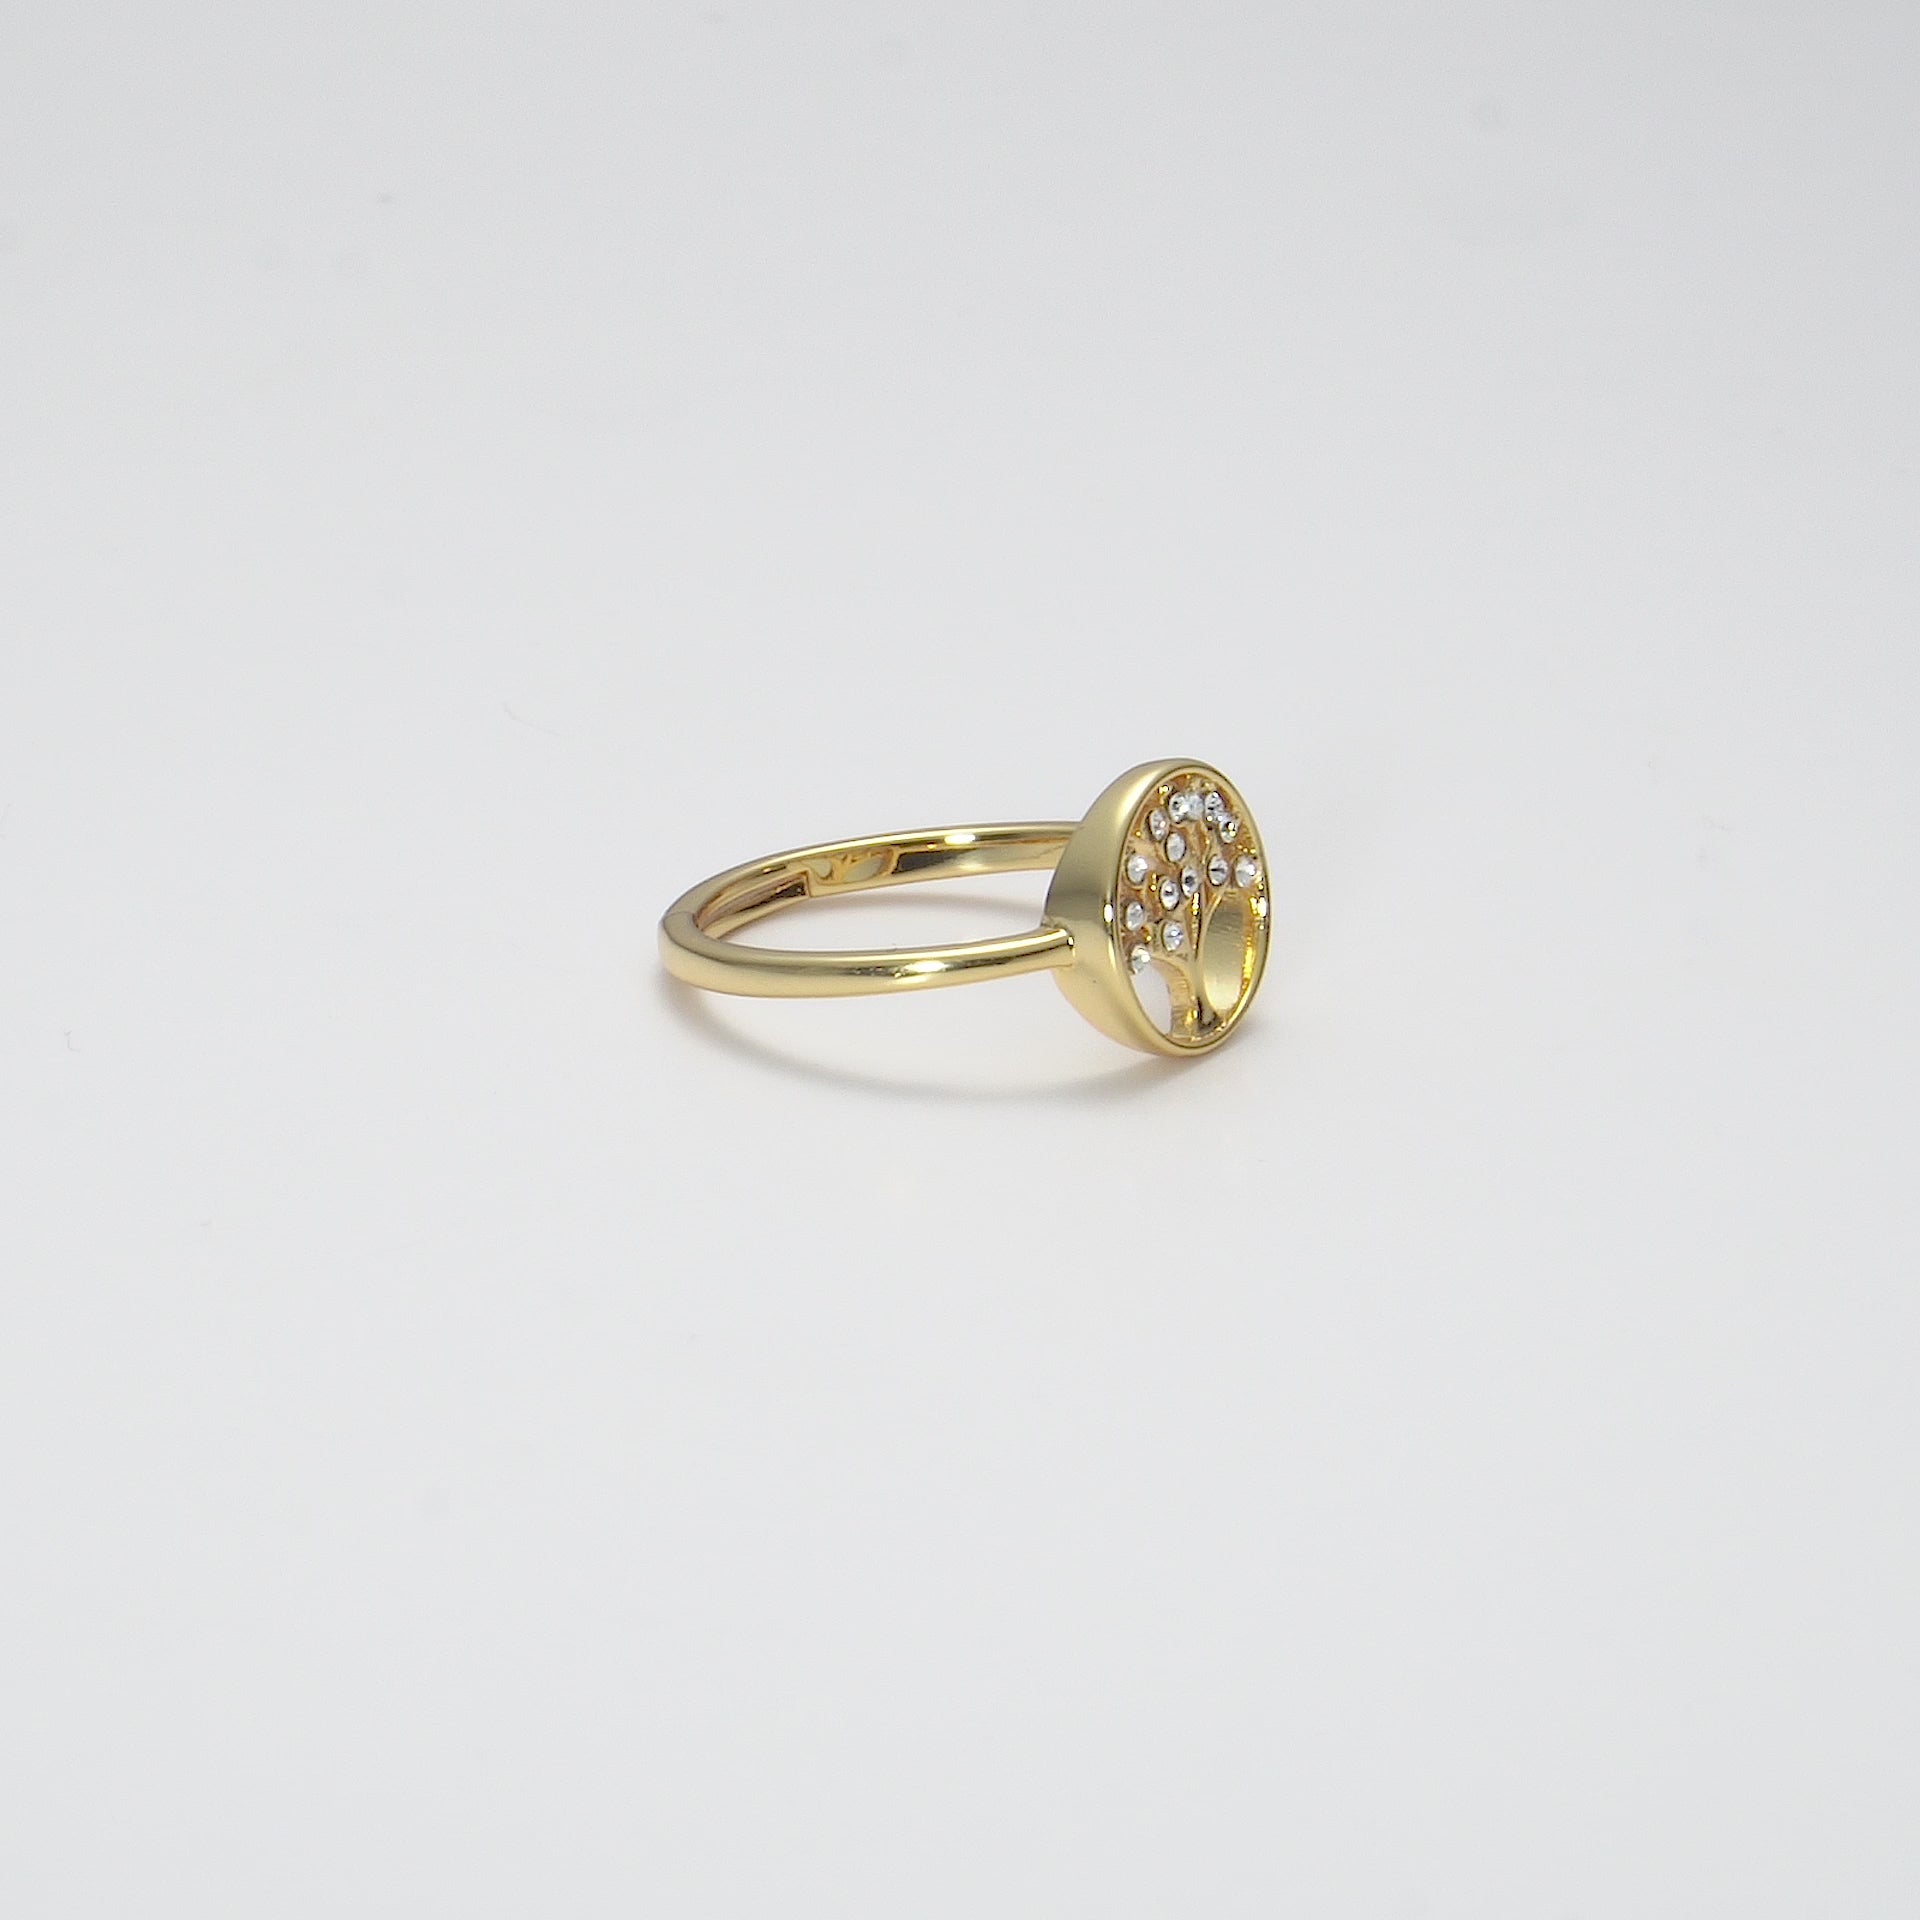 Gold Plated Adjustable Tree of Life Ring Created with Zircondia® Crystals Video